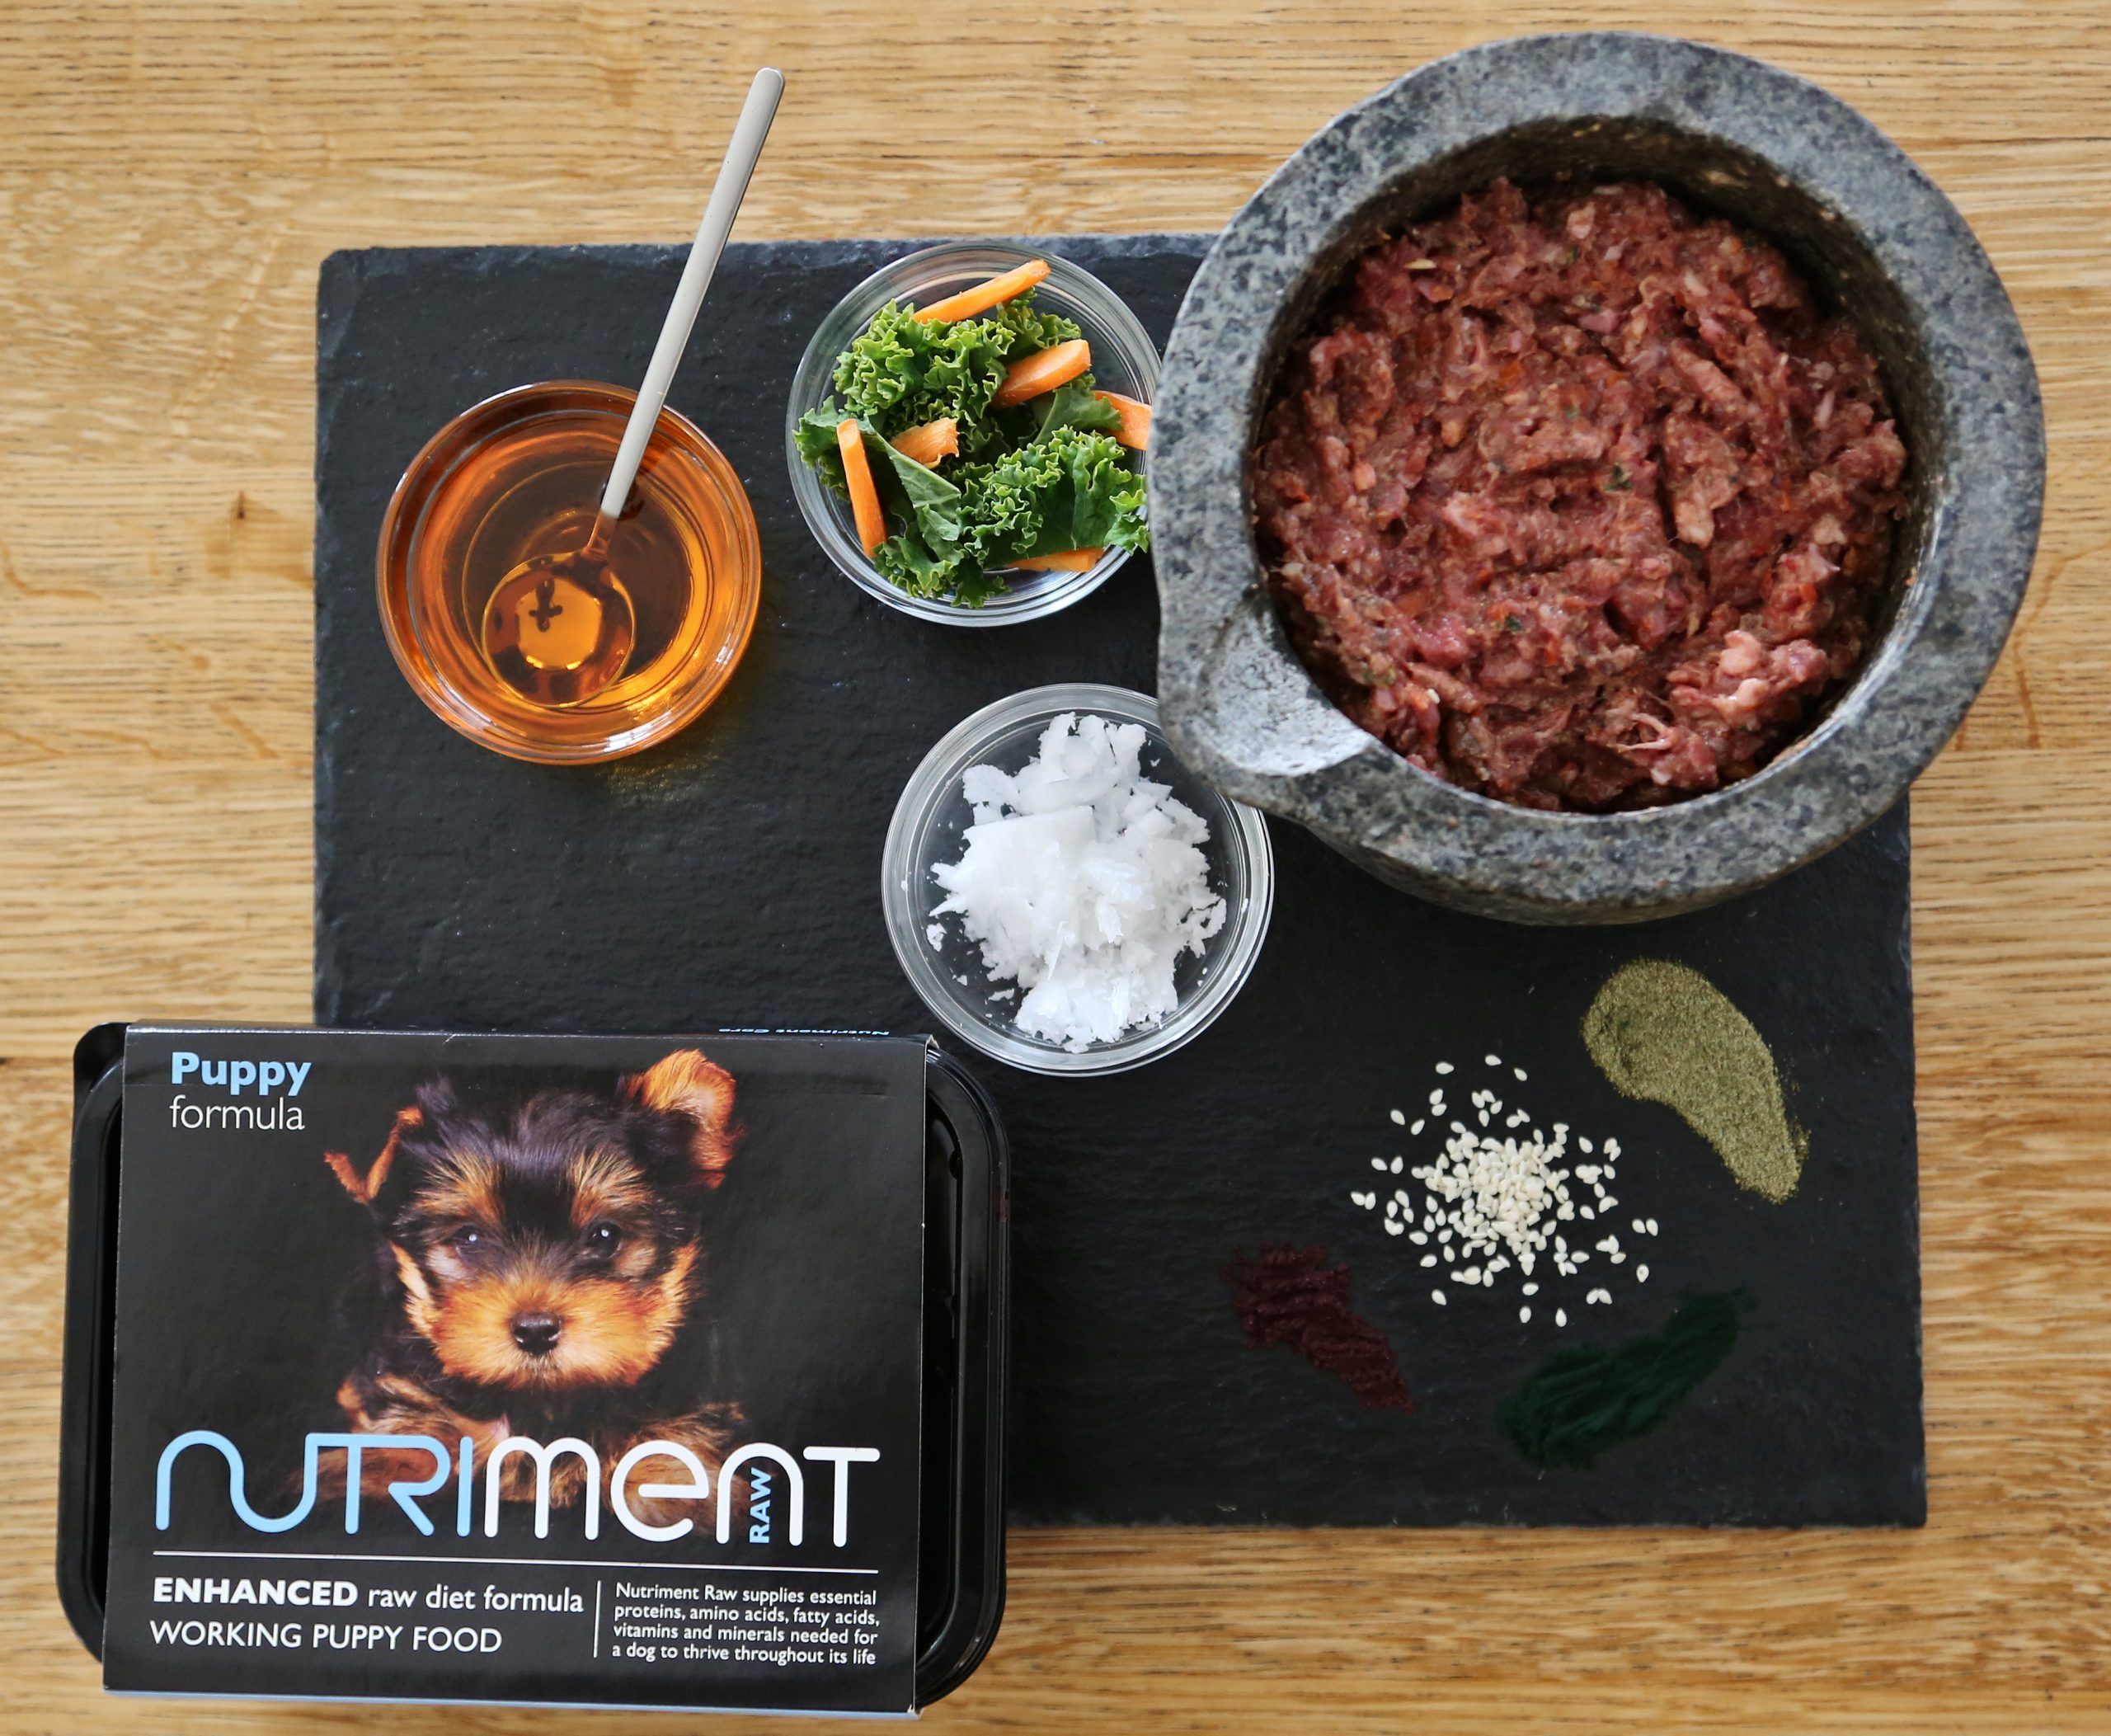 TCS Doubles Capacity for Nutriment - Nutriment pet food and raw ingredients